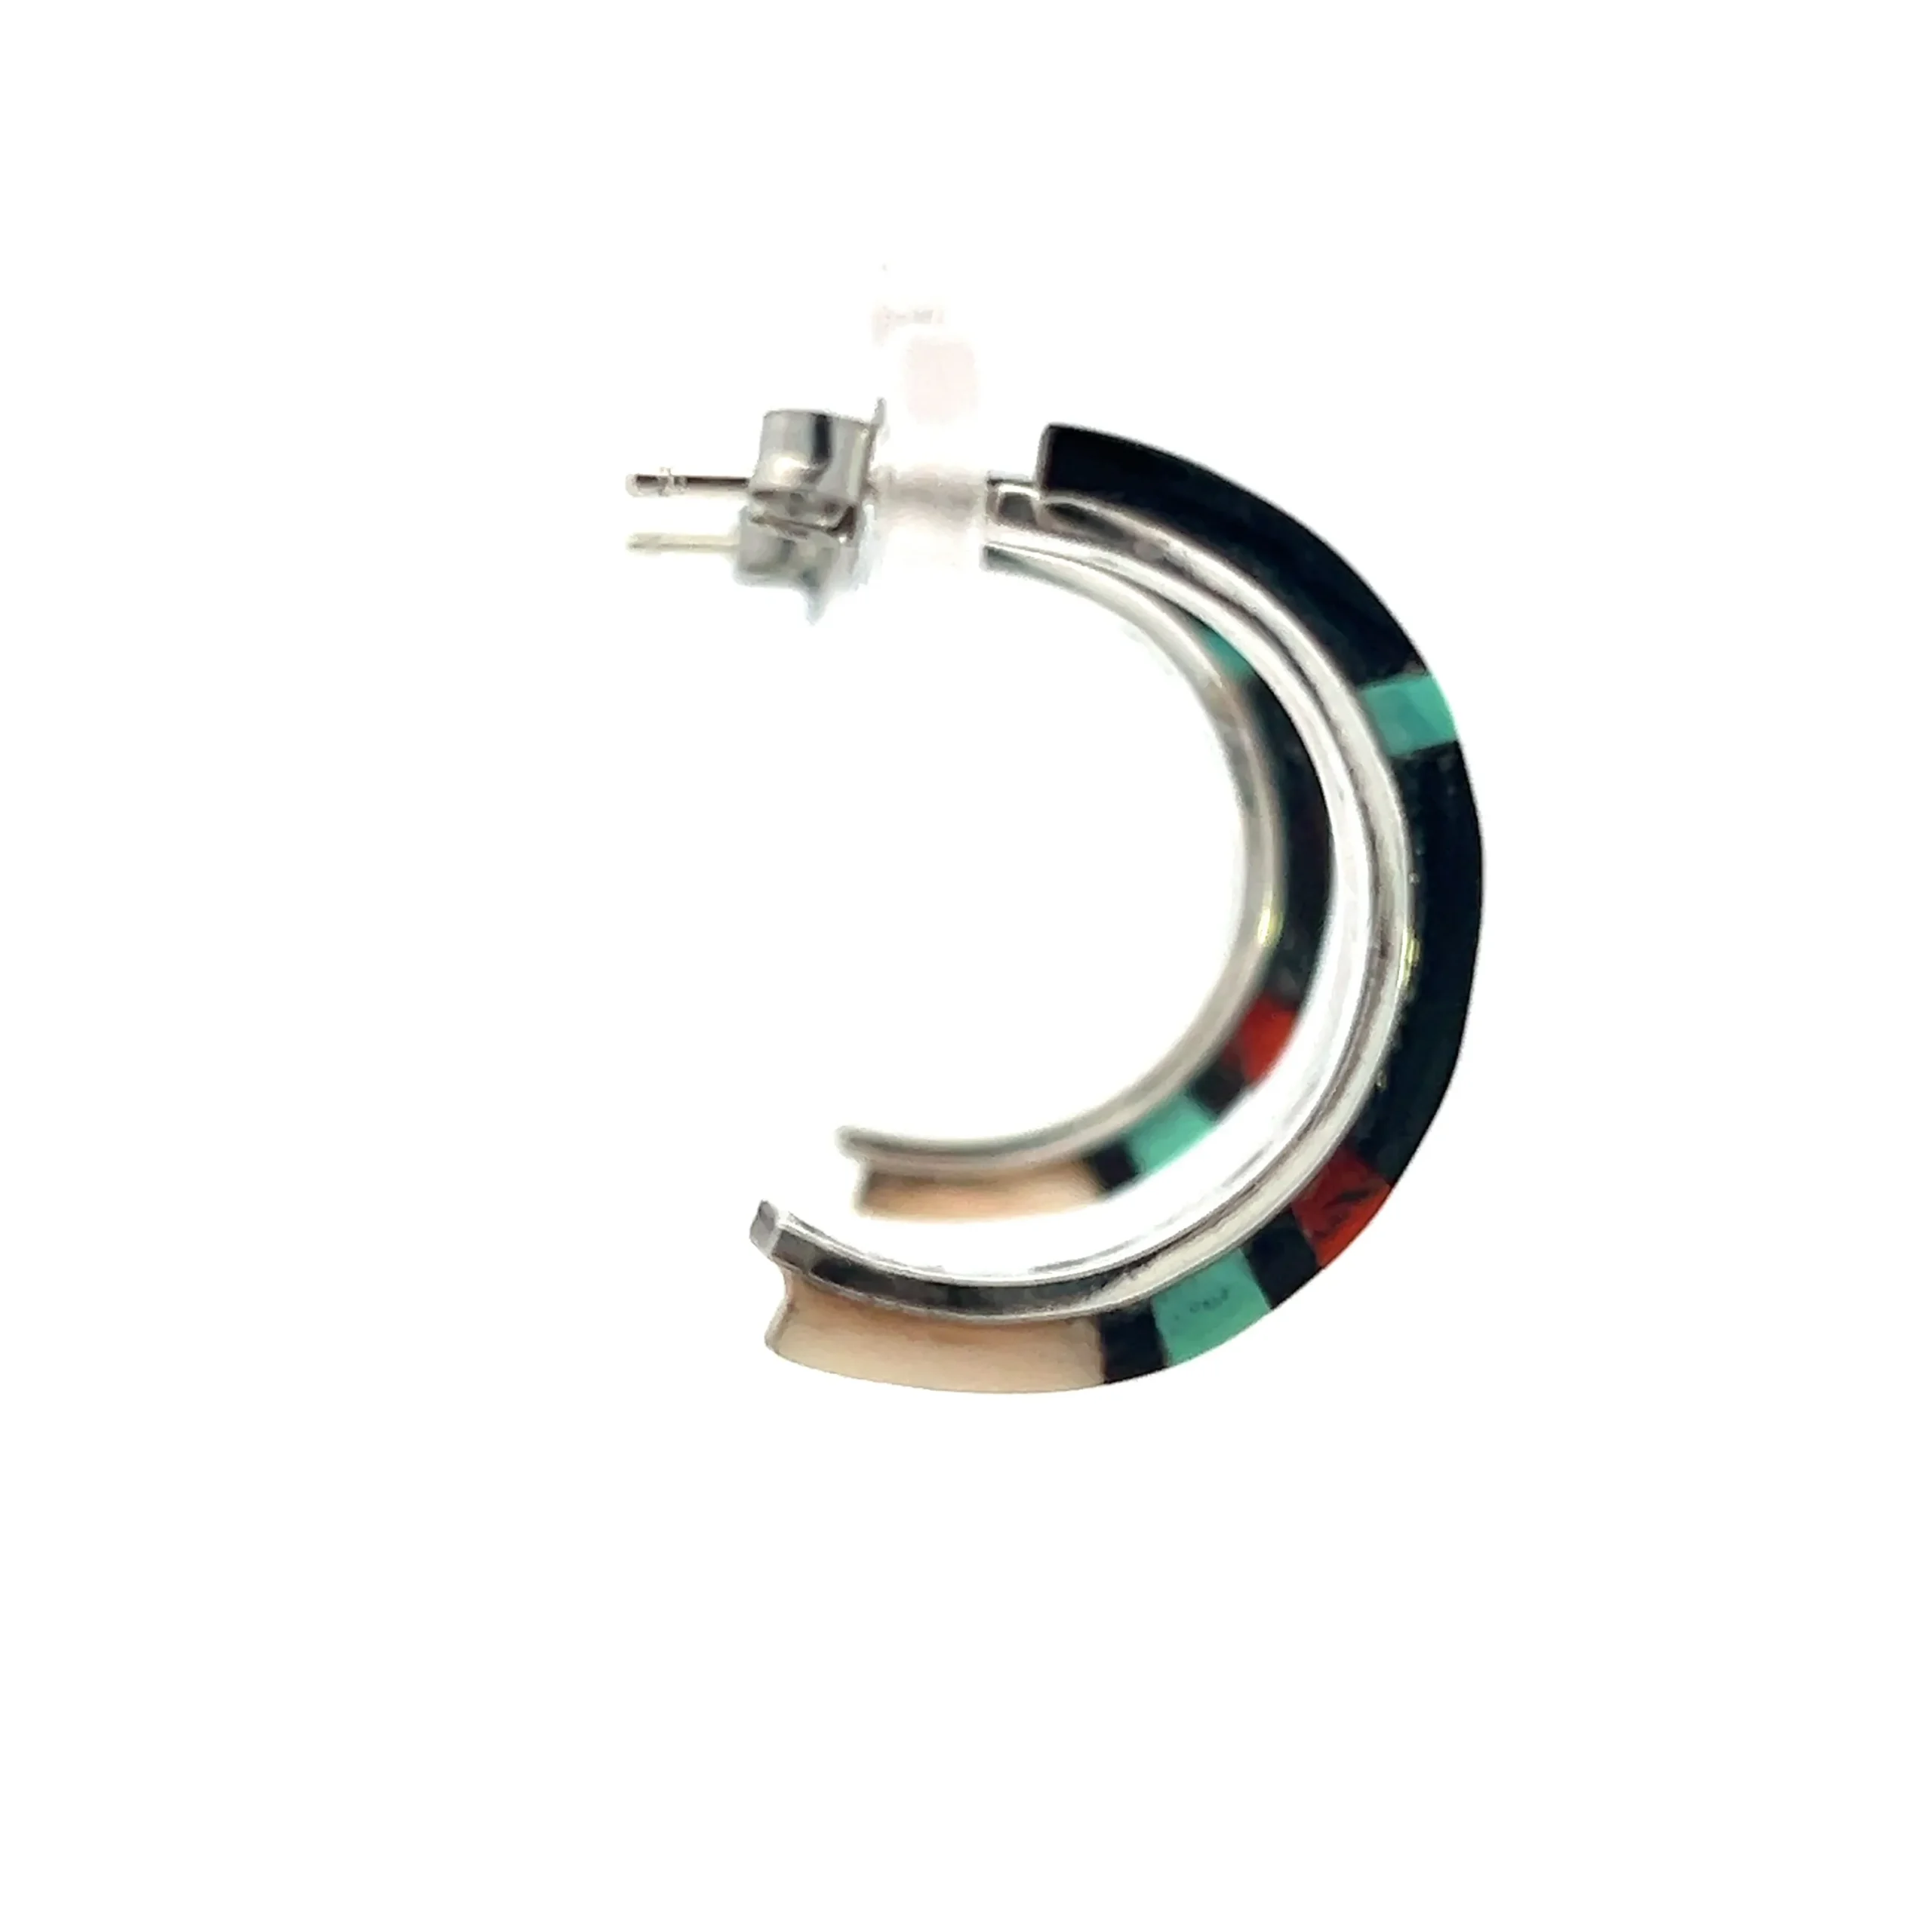 One estate pair of sterling silver half hoop earrings set with inlays of black onyx, coral, and turquoise. Vintage from the 1970s. Total weight of 3.80 grams. Secured with friction posts and backs.